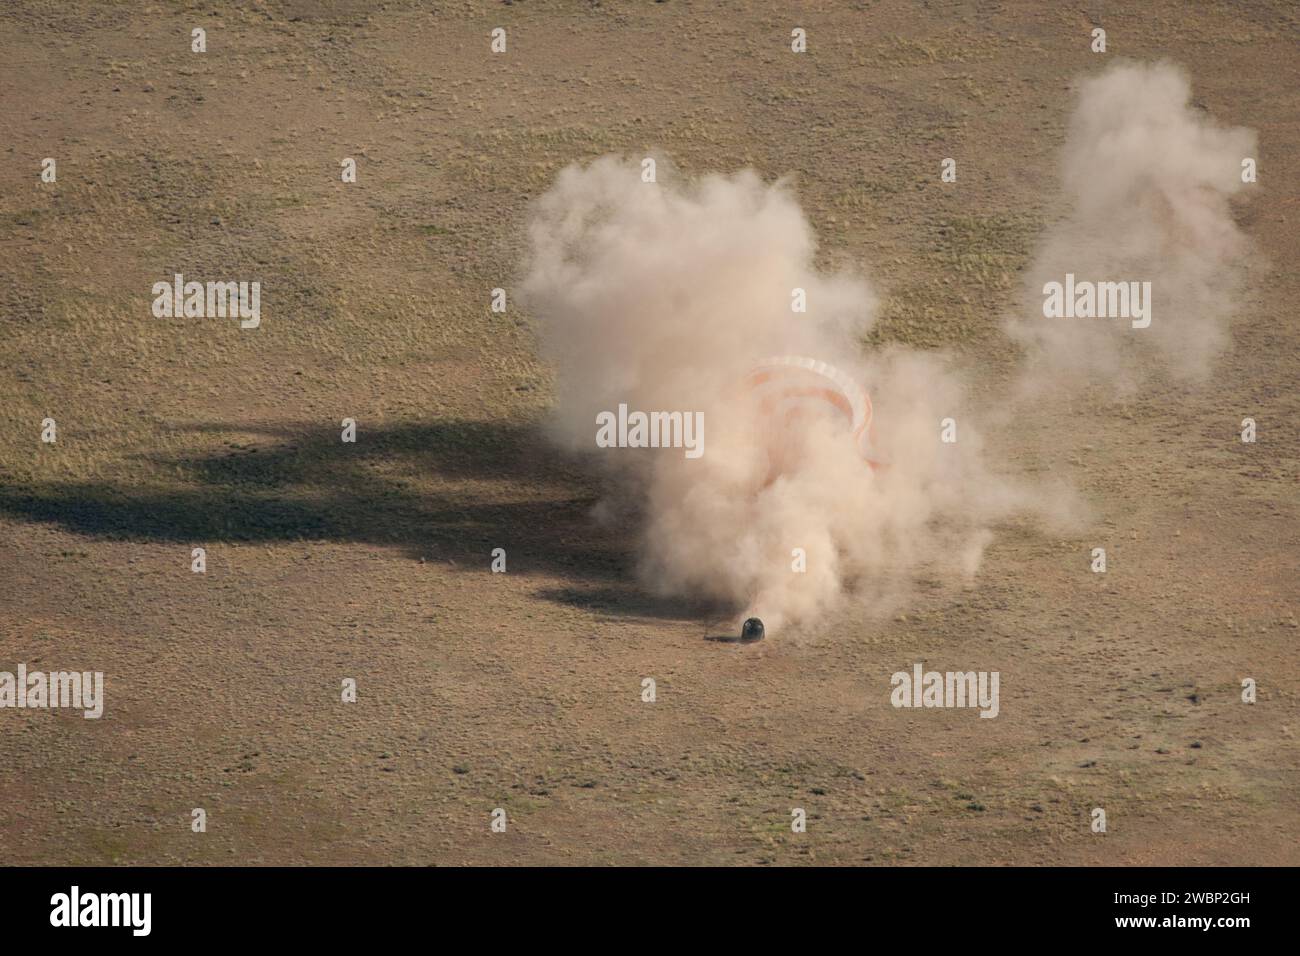 The Soyuz TMA-20 spacecraft is seen as it lands with Expedition 27 Commander Dmitry Kondratyev and Flight Engineers Paolo Nespoli and Cady Coleman in a remote area southeast of the town of Zhezkazgan, Kazakhstan, on Tuesday, May 24, 2011.   NASA Astronaut Coleman, Russian Cosmonaut Kondratyev and Italian Astronaut Nespoli are returning from more than five months onboard the International Space Station where they served as members of the Expedition 26 and 27 crews. Stock Photo